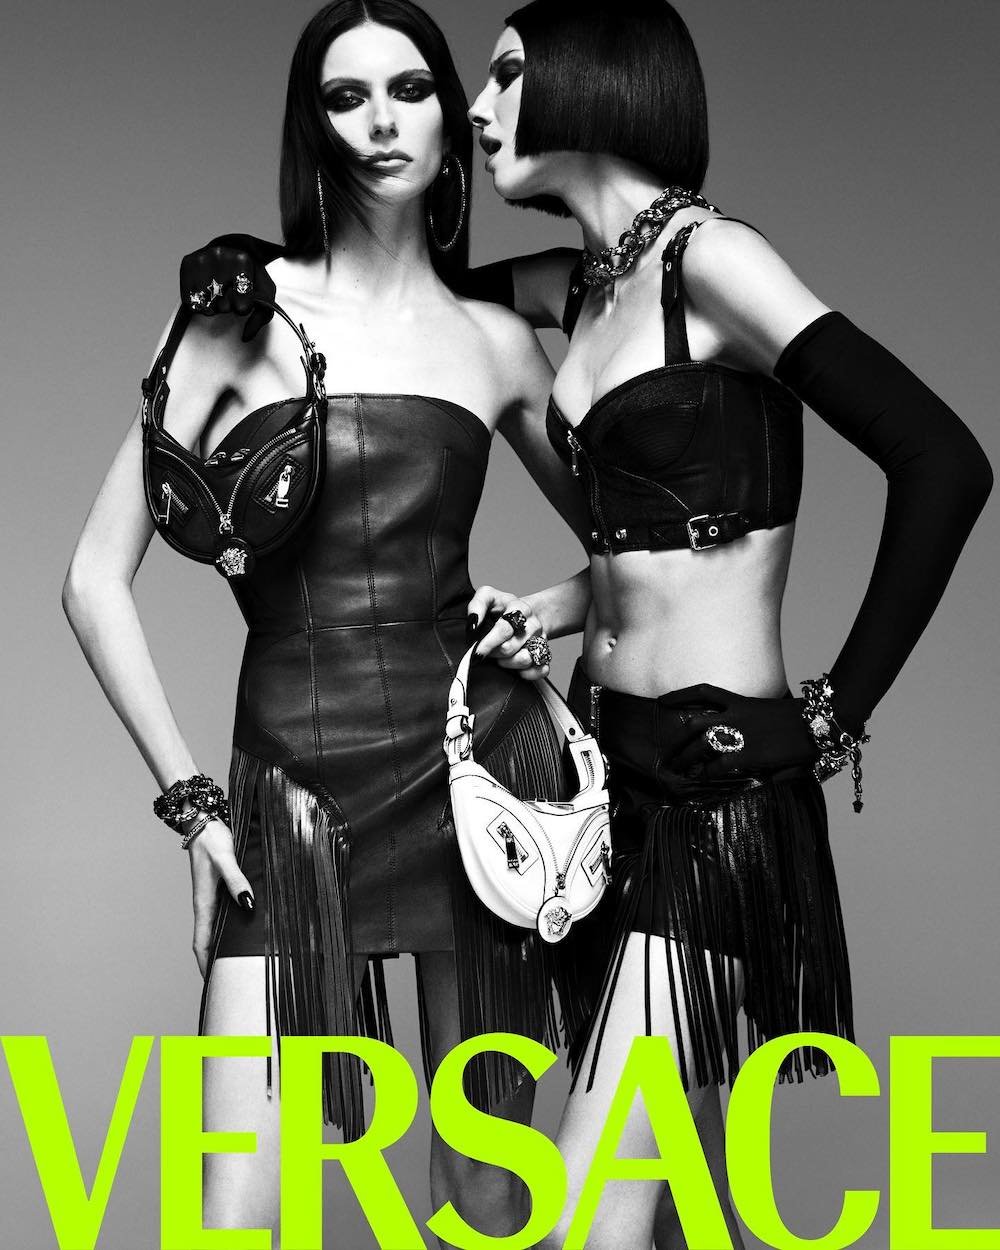 Versace SS 2023 Campaign-Pt 2 Lensed by Vito Fernicola Turns Up the Volume  — Anne of Carversville